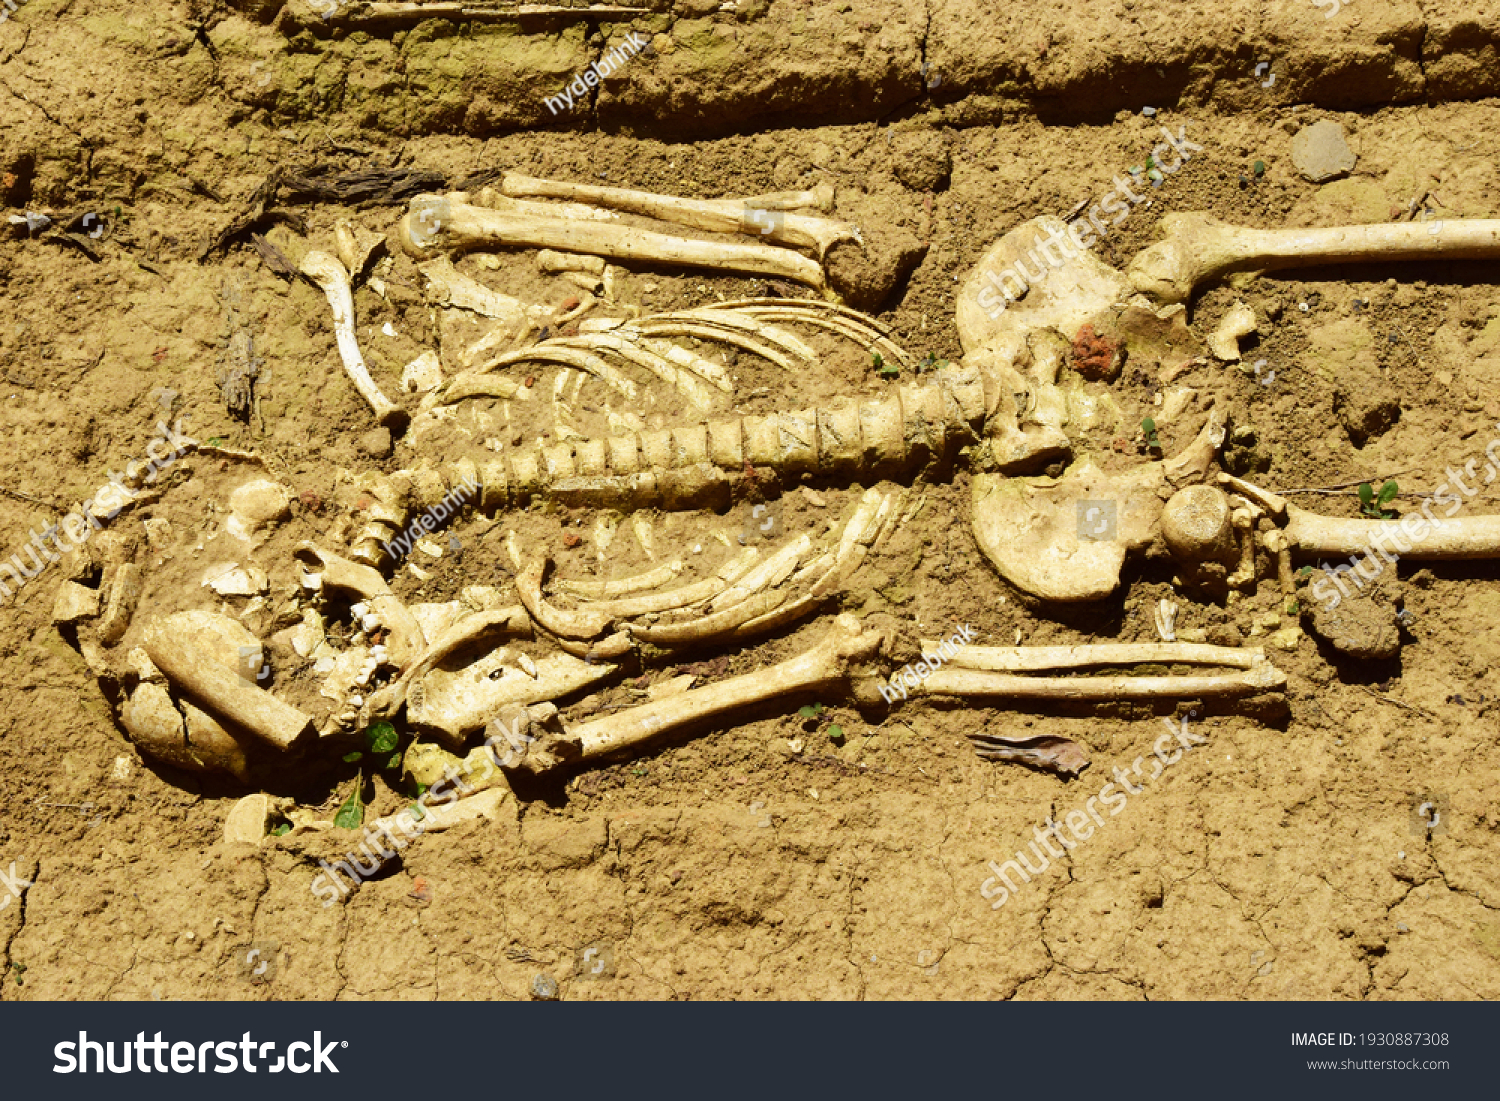 Human skeleton in an archaeological dig  #1930887308